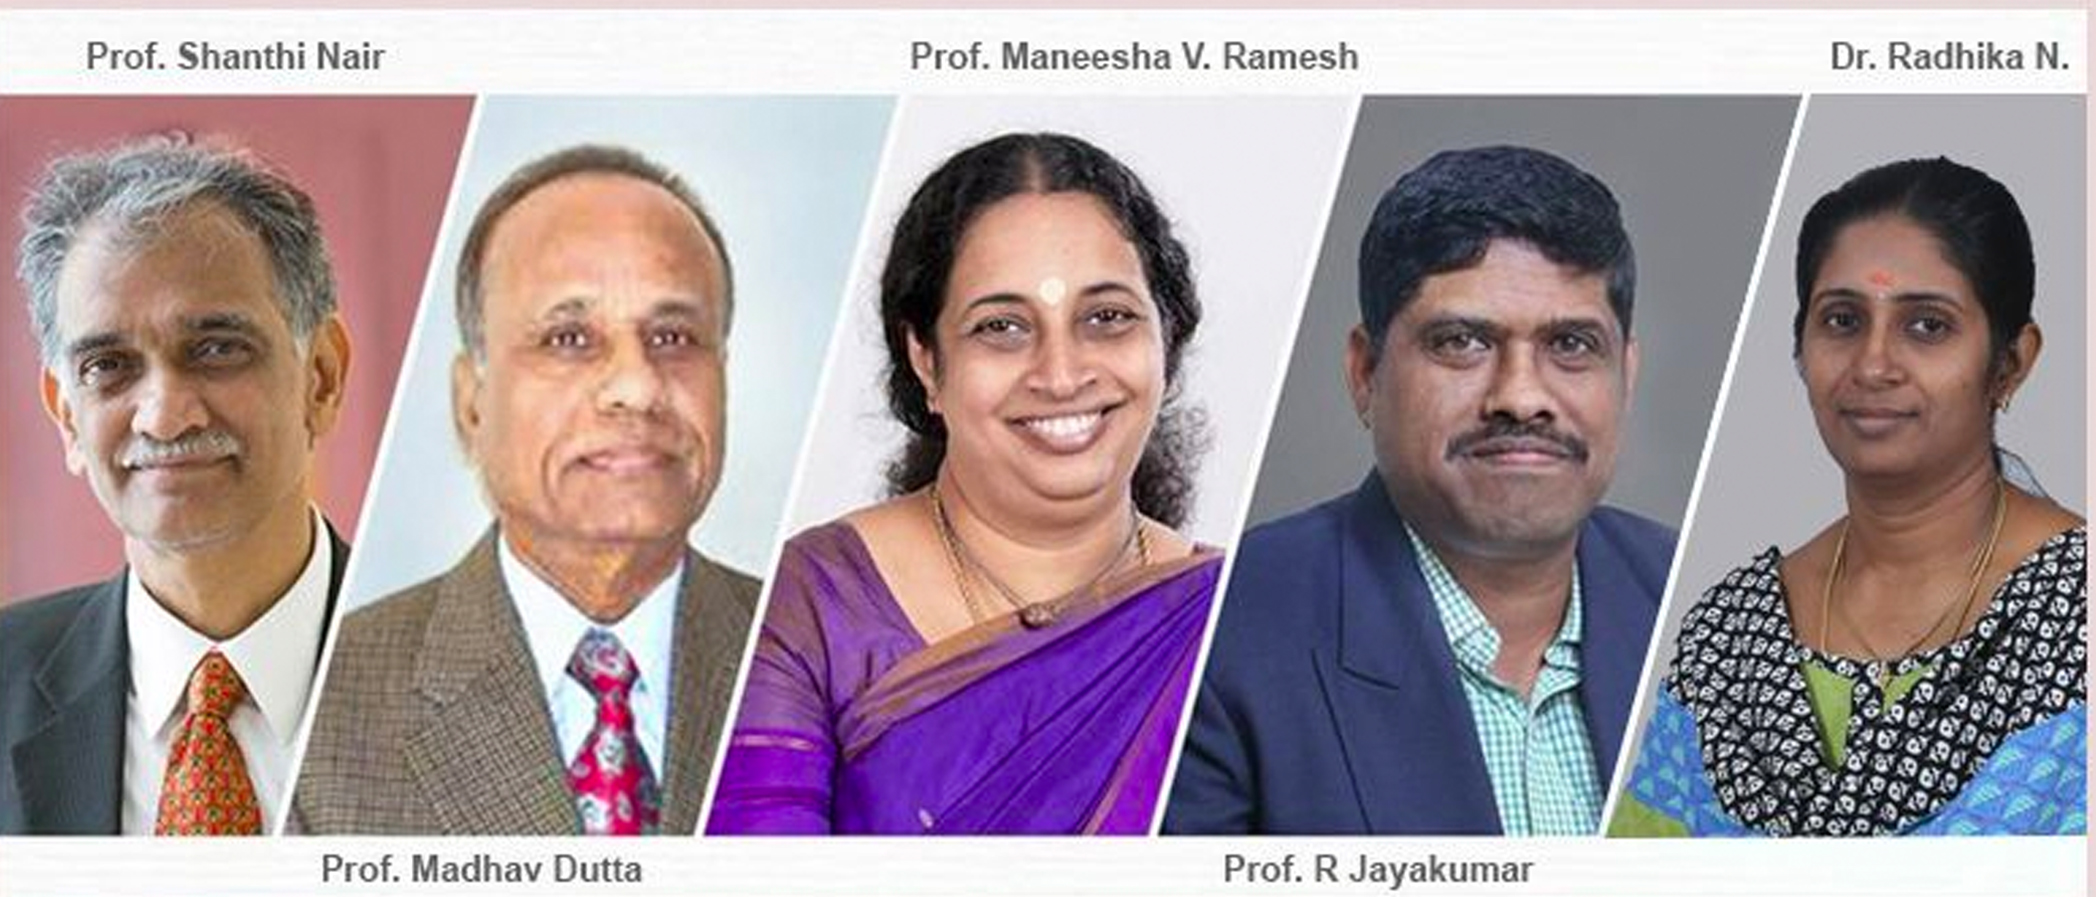 Five Amrita Professors Among the World’s Top 2% of Top Scientists.